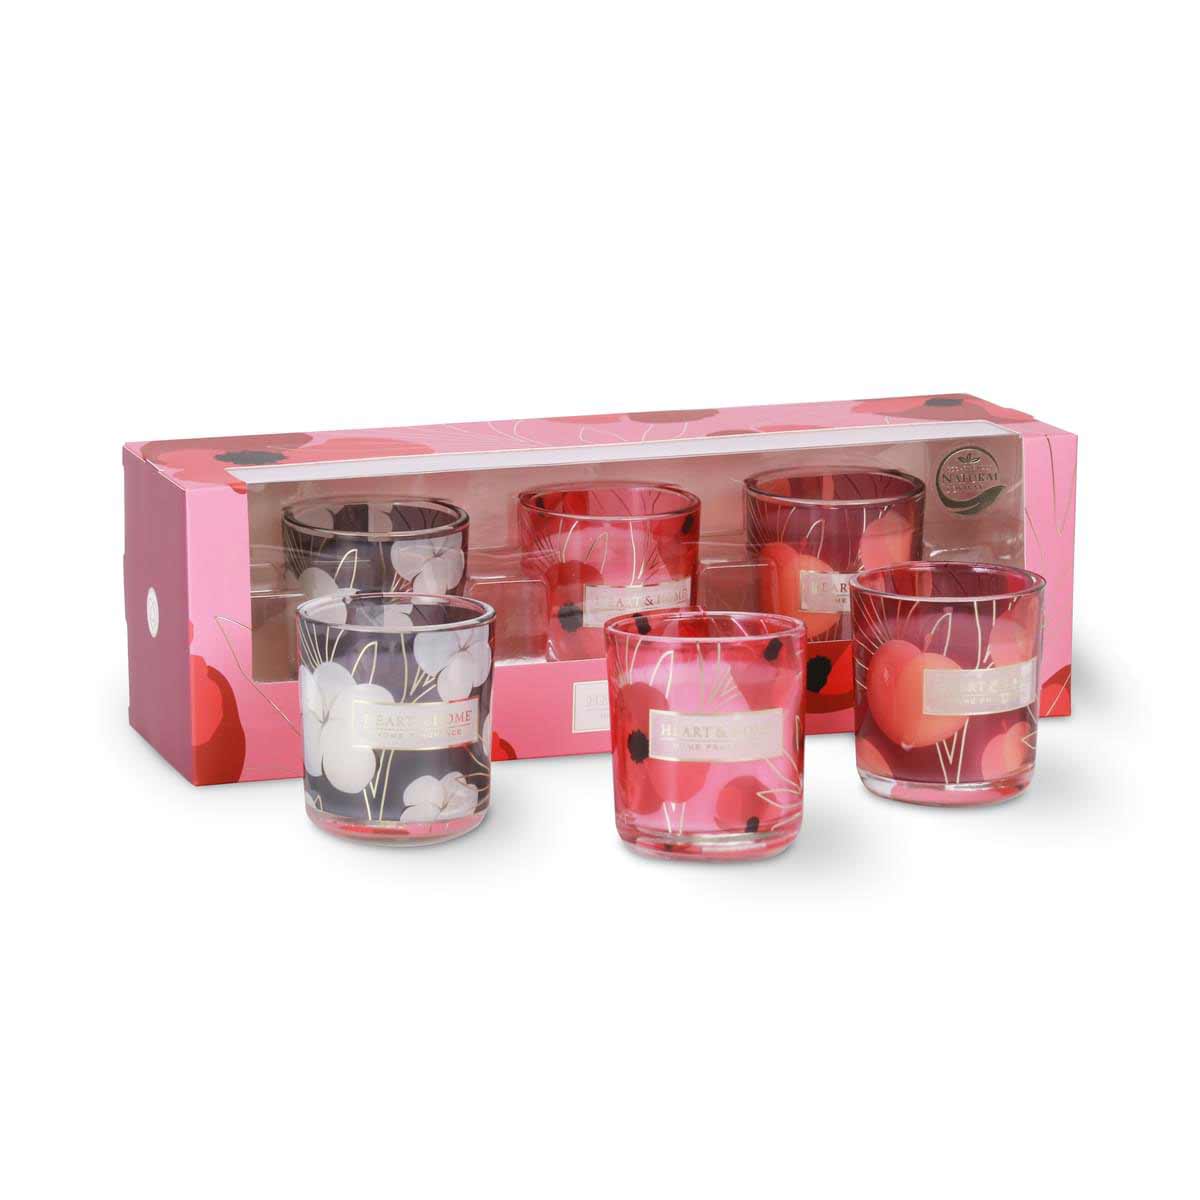 Gift box 3 Votives Heart and Home candles